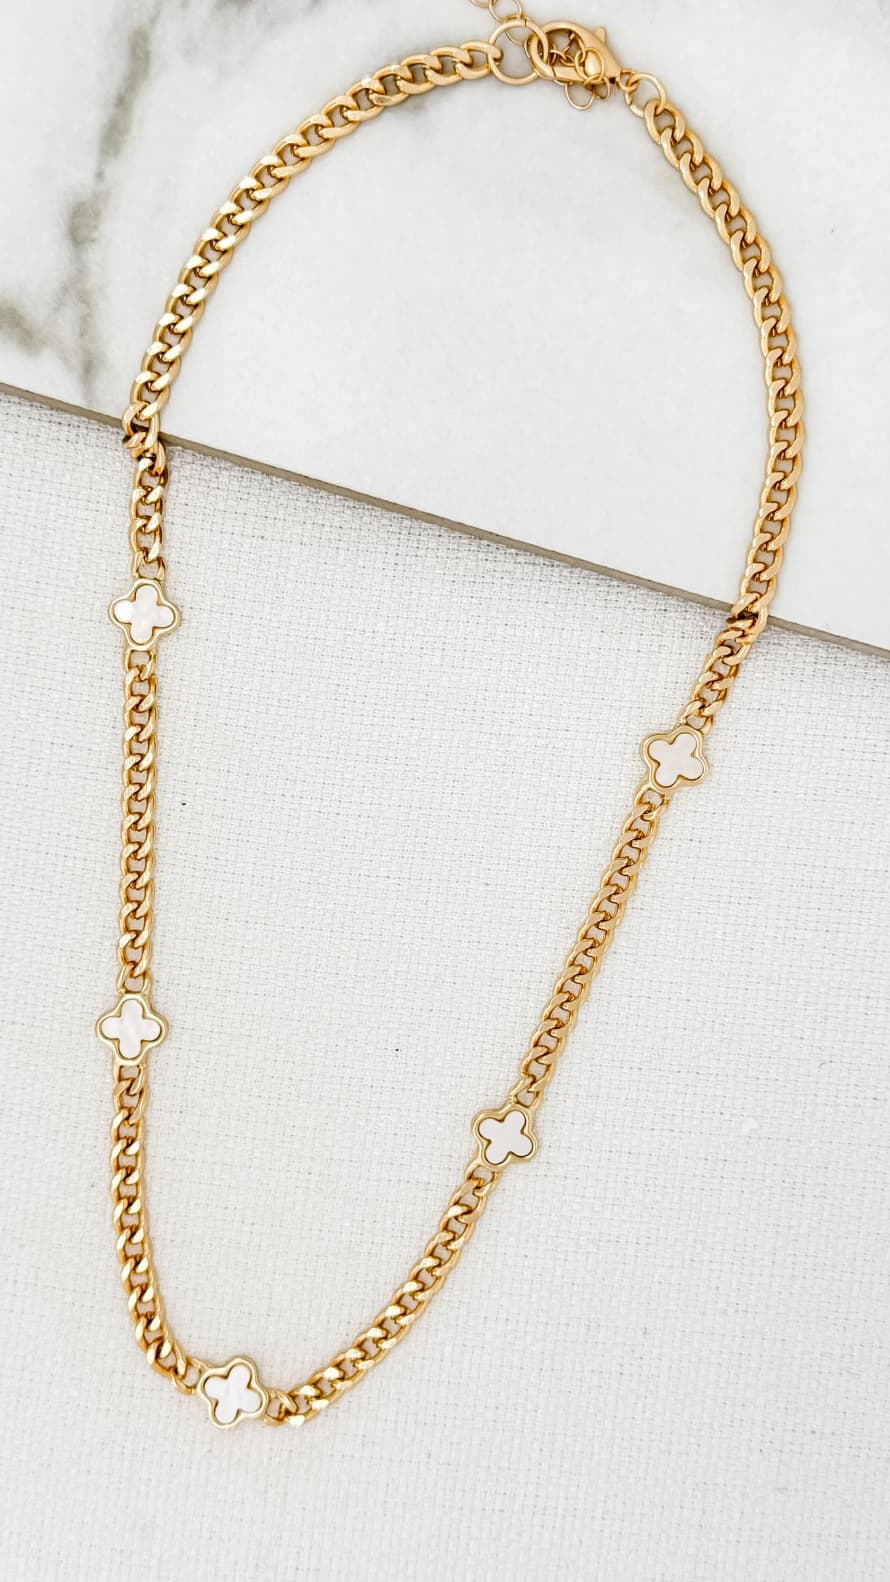 Envy Short Gold Curb Chain Necklace with 5 White Fleurs